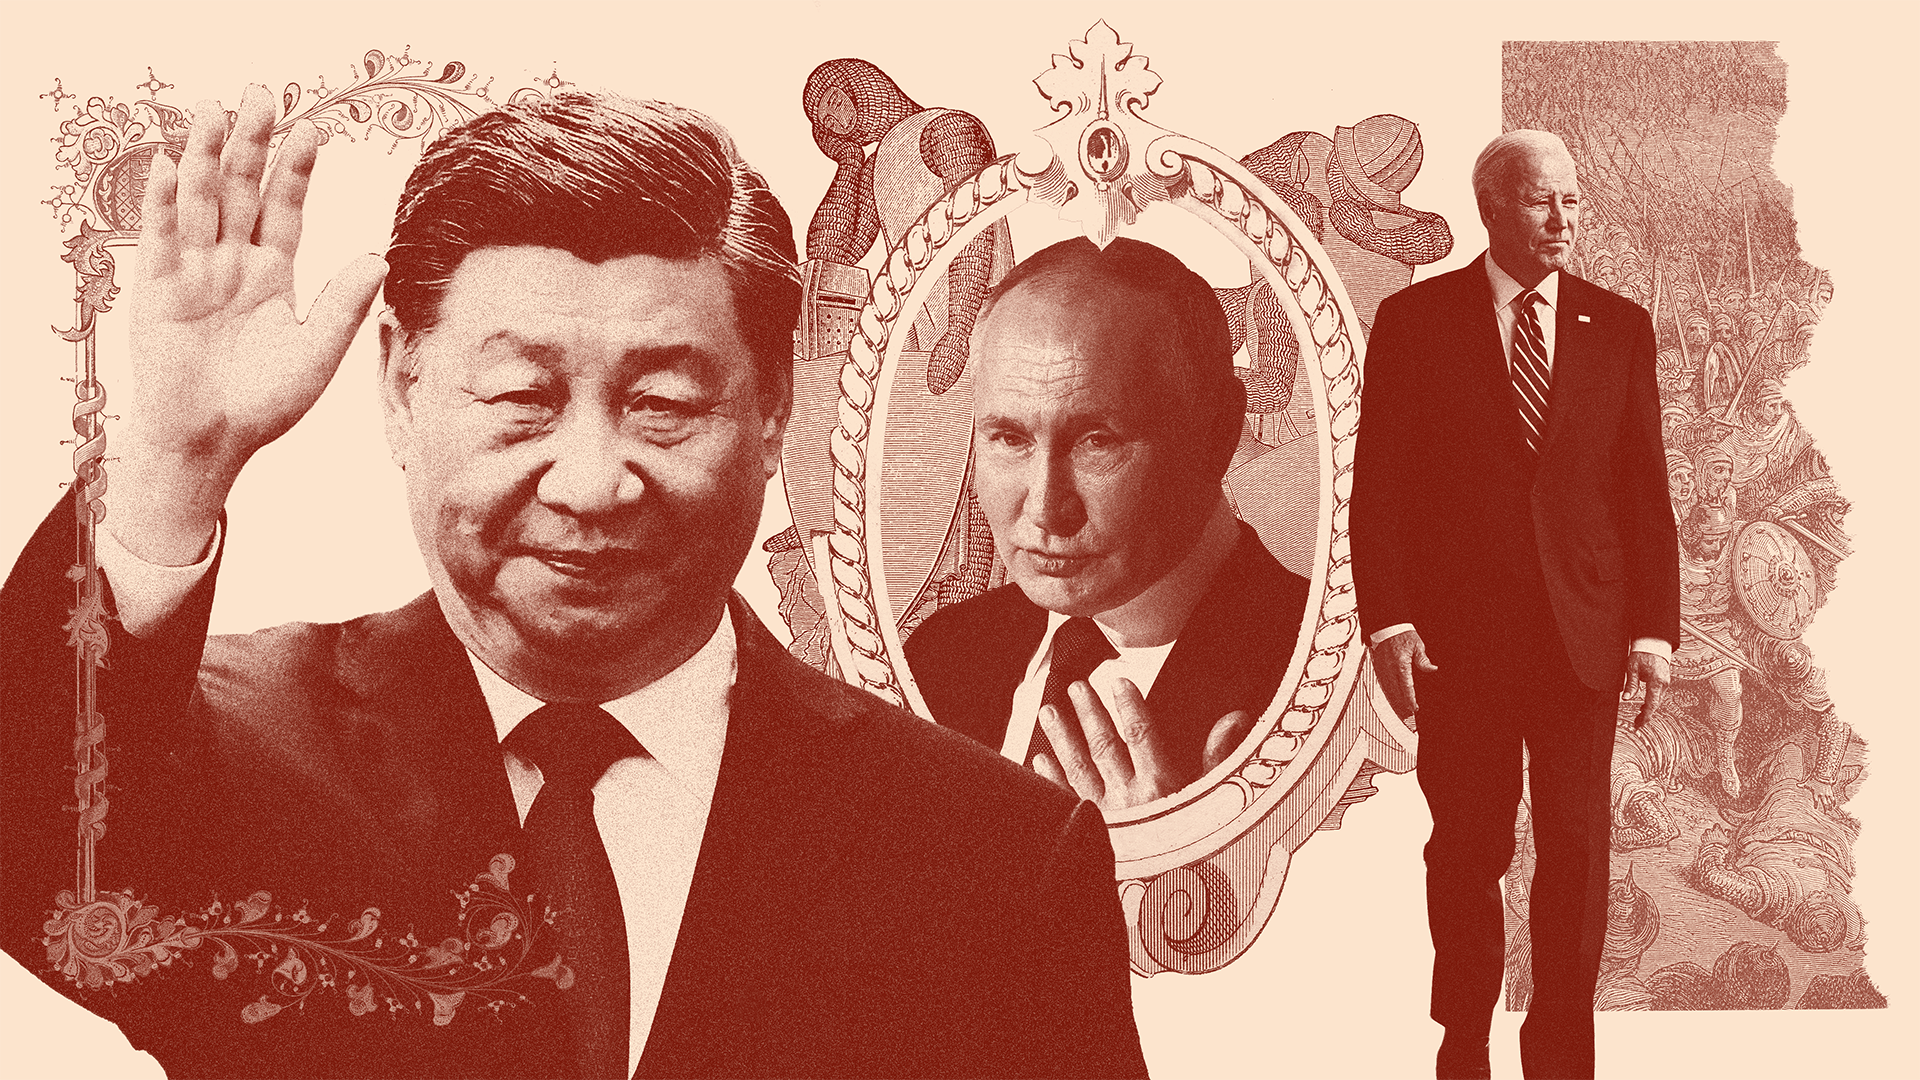 A photo collage shows Xi Jinping, Vladimir Putin, and Joe Biden in a scene of medieval art elements.